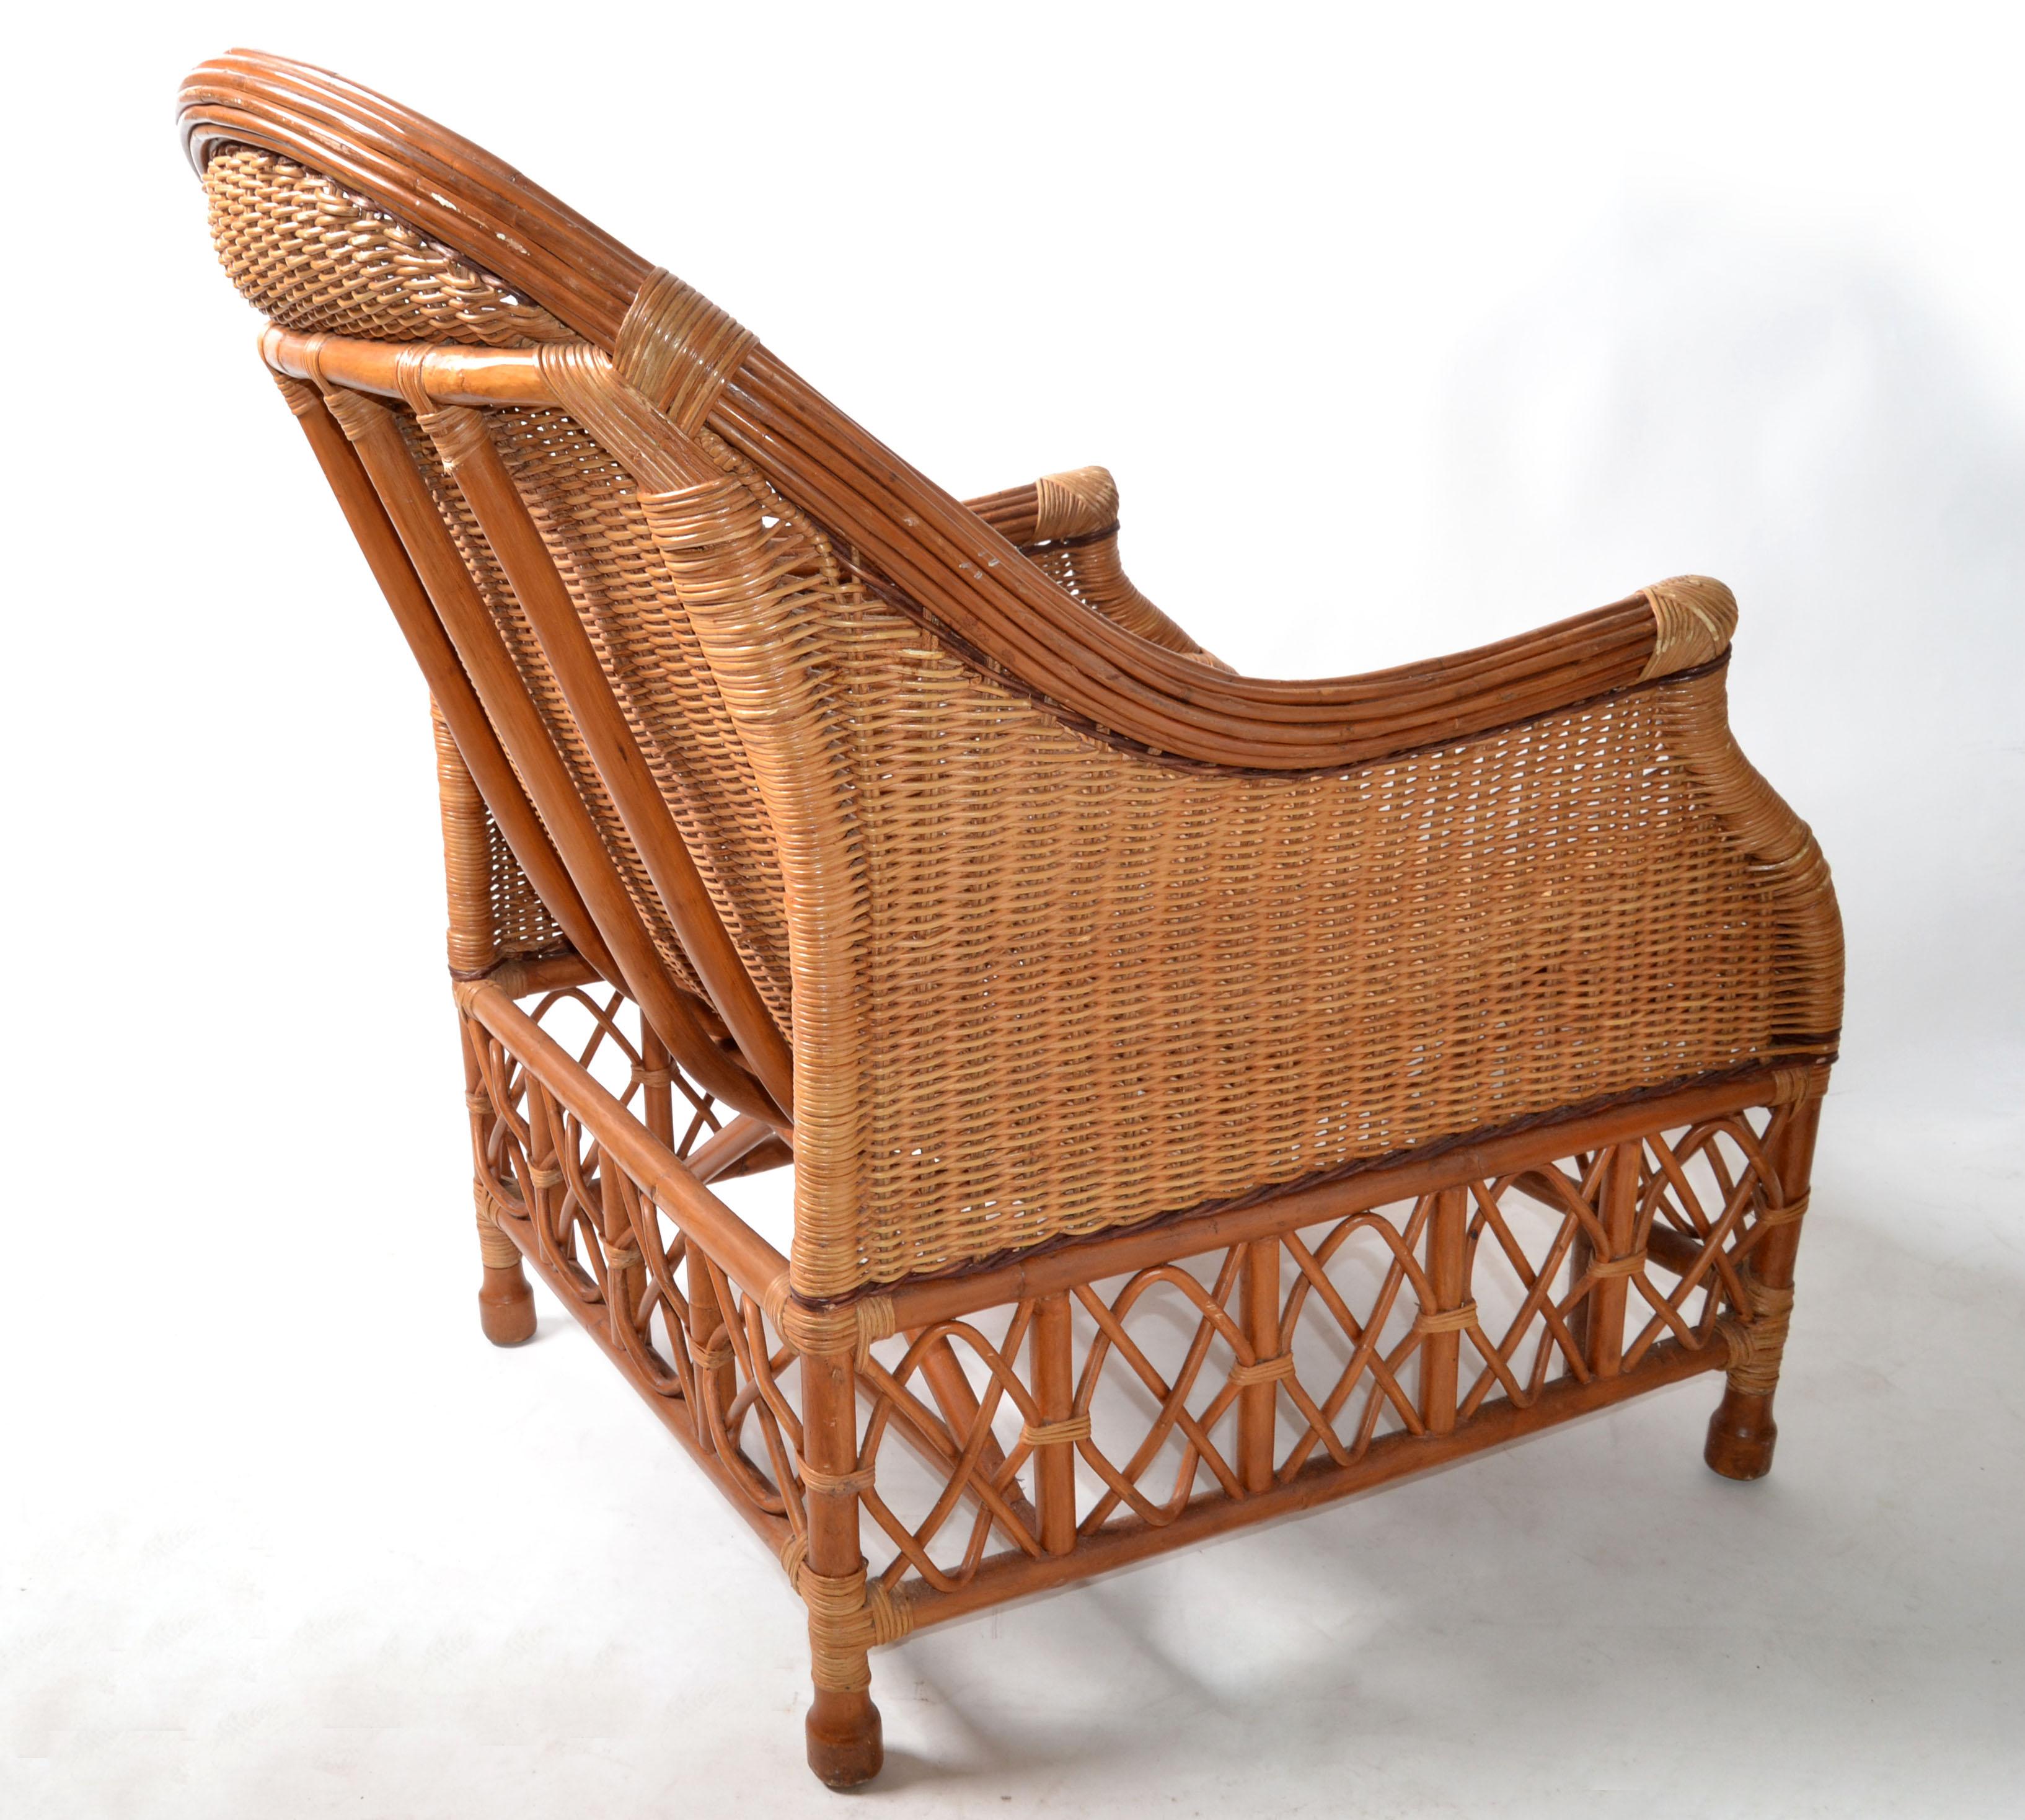 Bamboo, Cane & Wicker Lounge Chair Handwoven Bohemian 1960 Mid-Century Modern For Sale 5